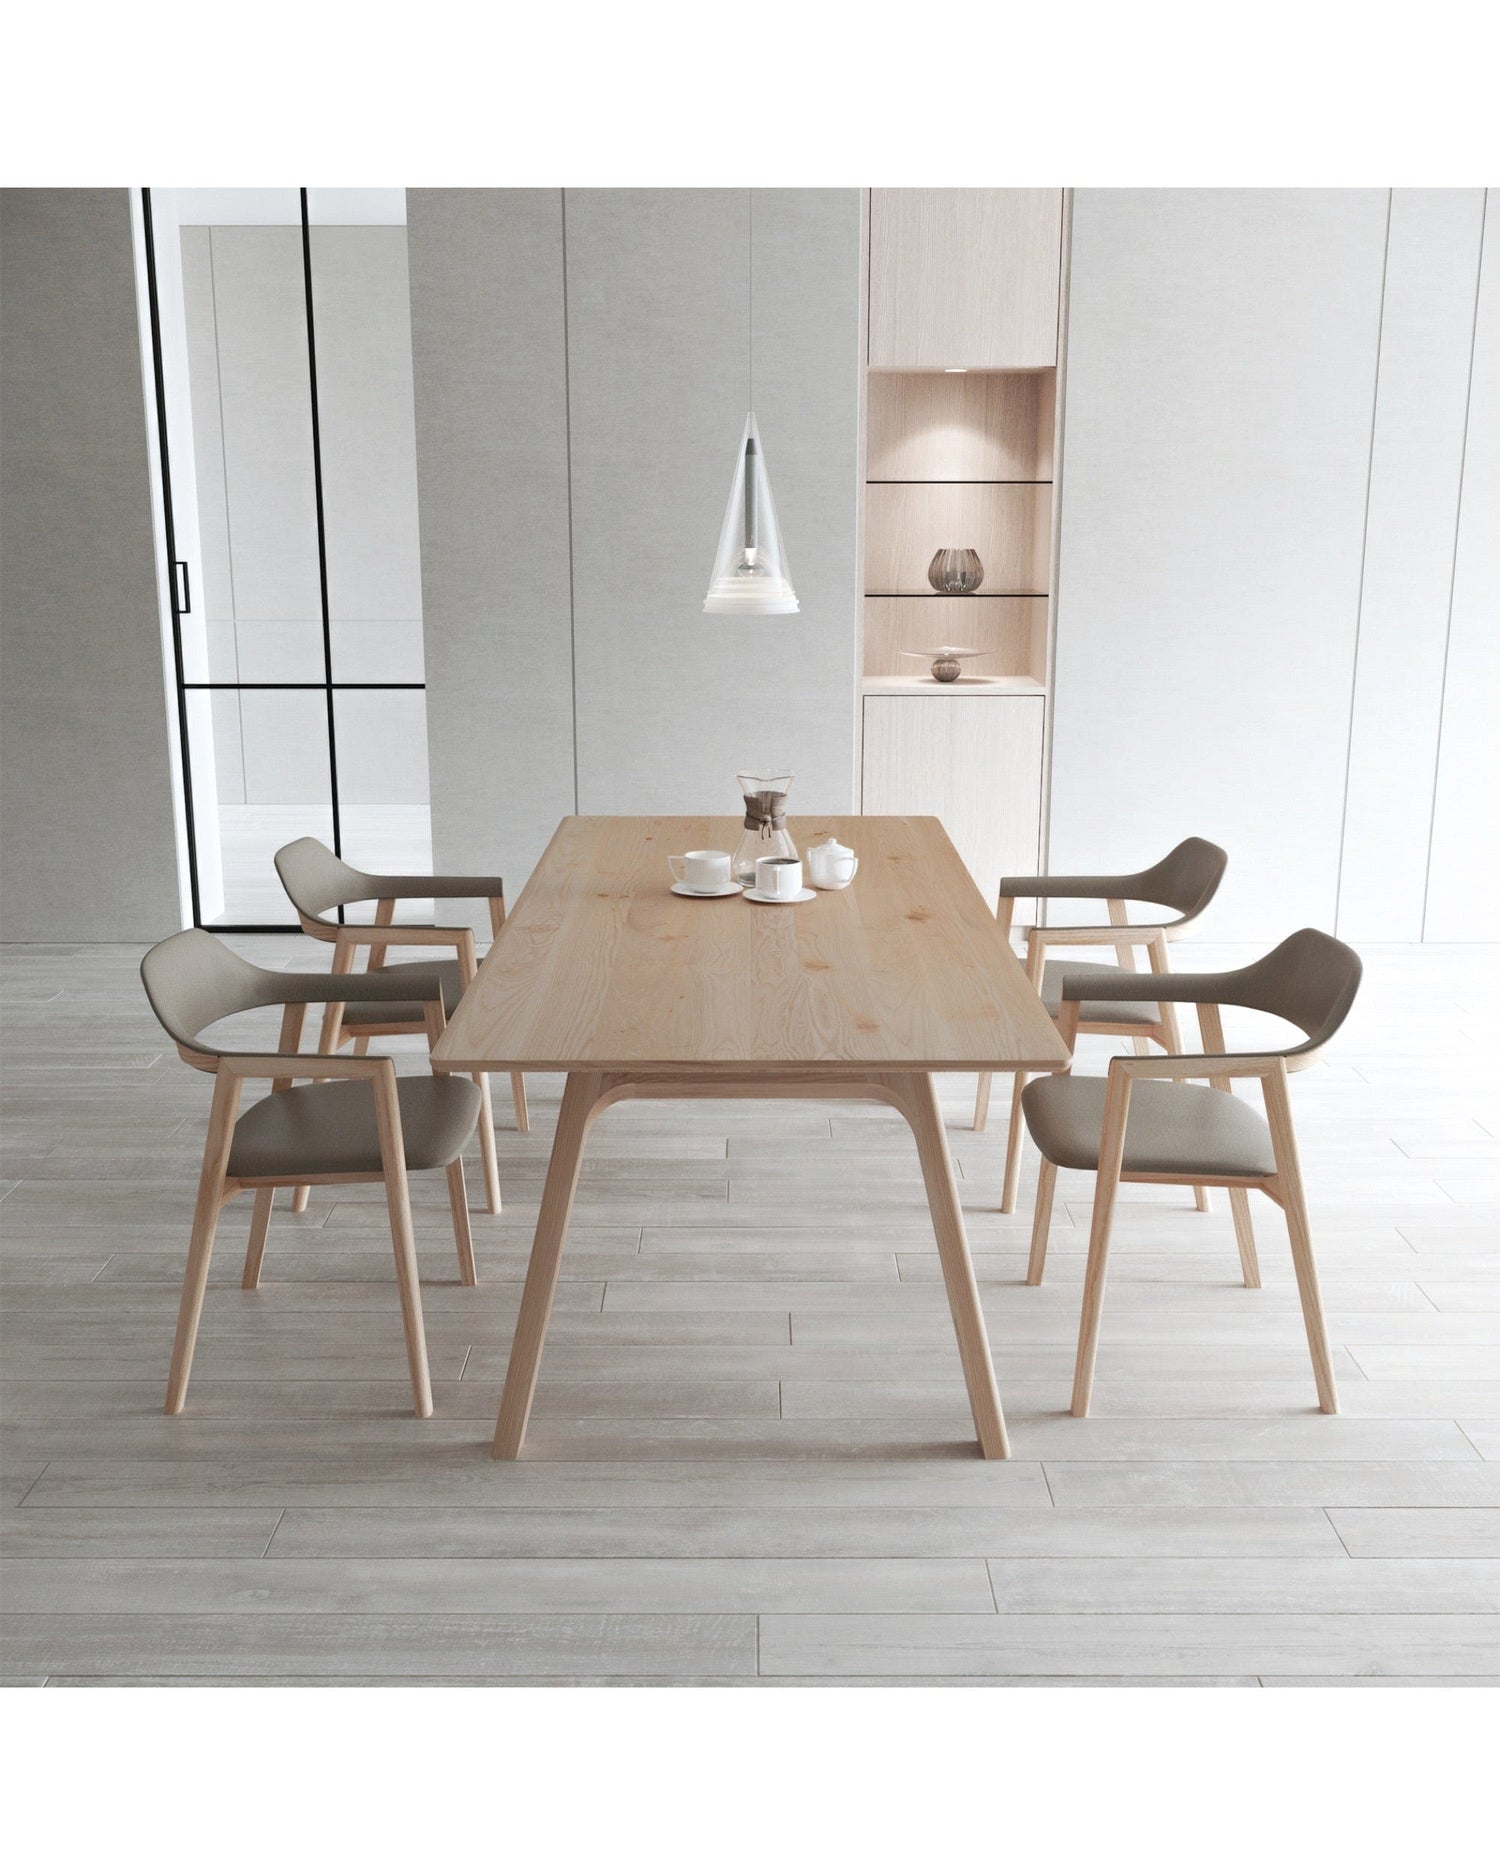 TEN Table by CondeHouse